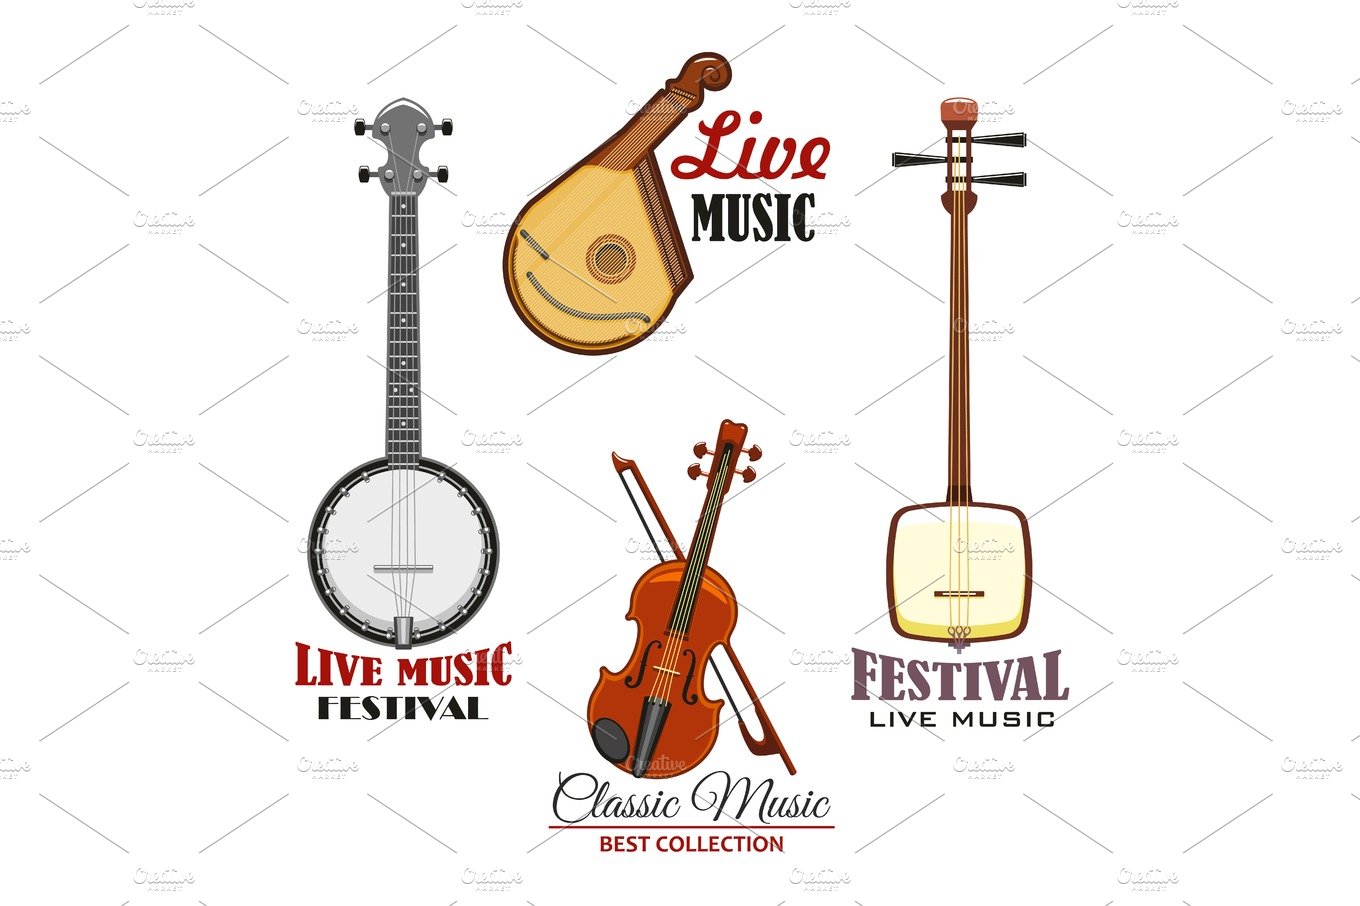 Musical instrument icon for music concert design cover image.